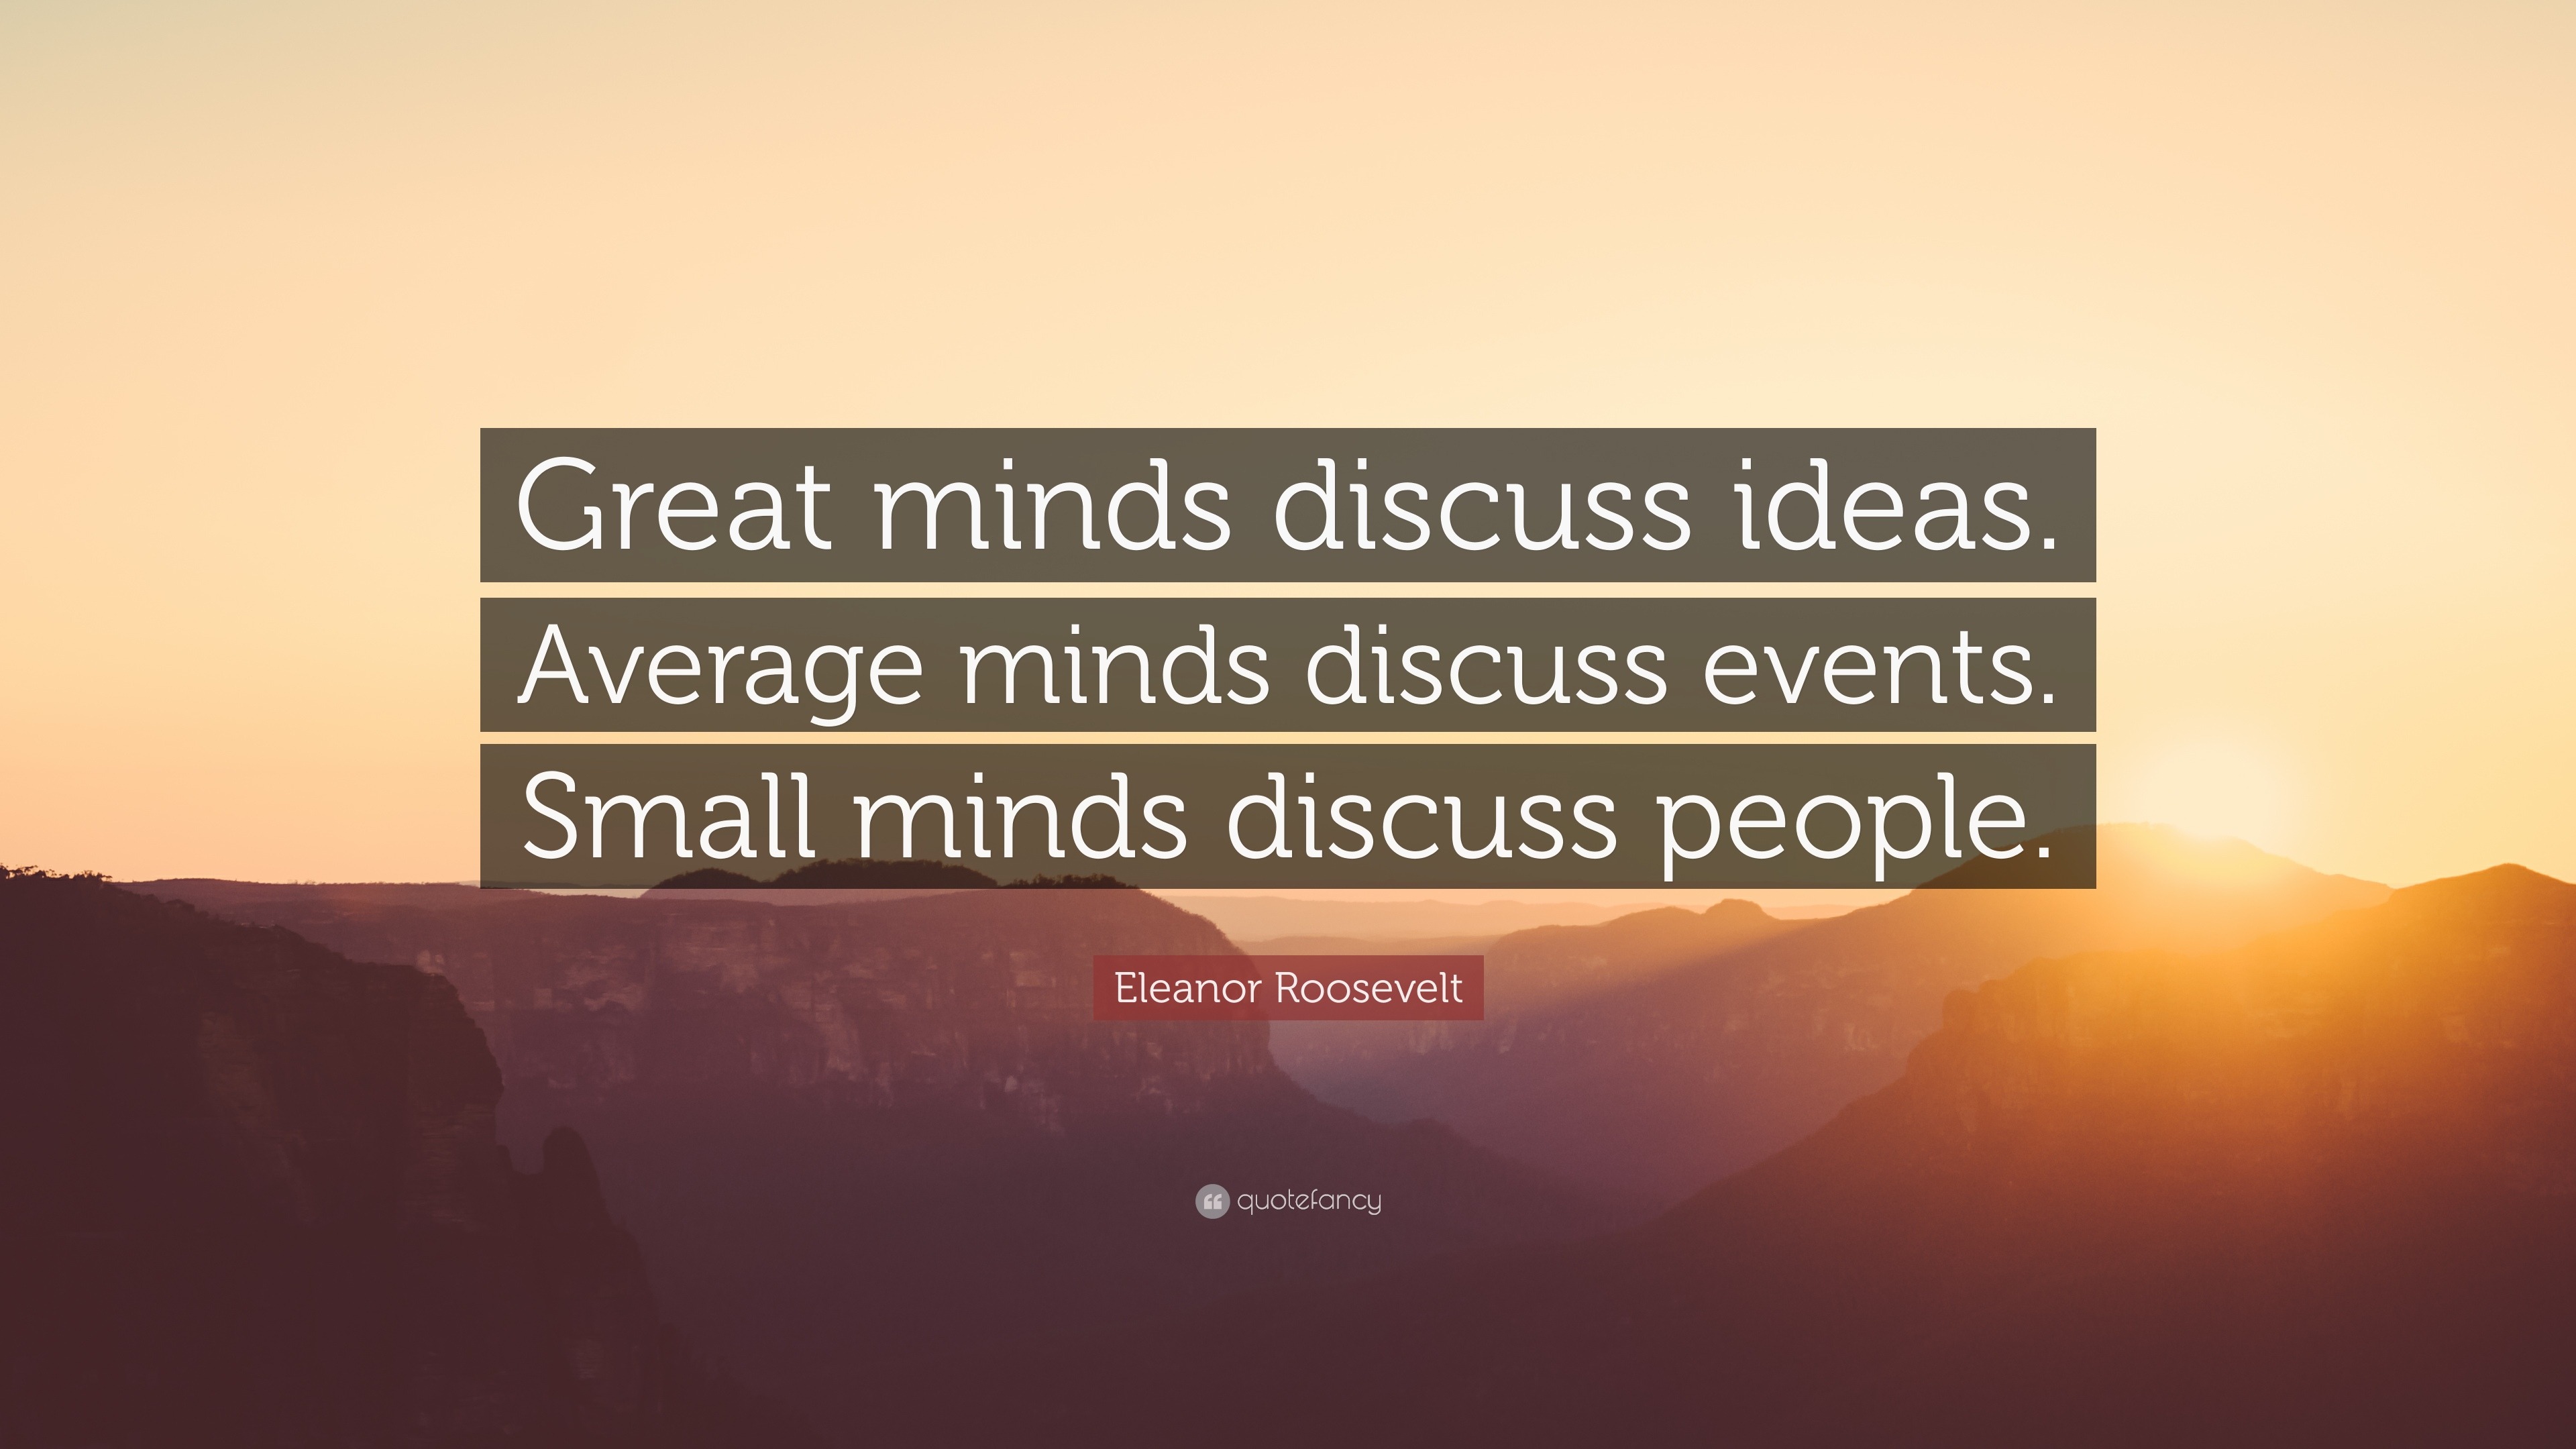 Eleanor Roosevelt Quote: "Great minds discuss ideas. Average minds discuss events. Small minds ...